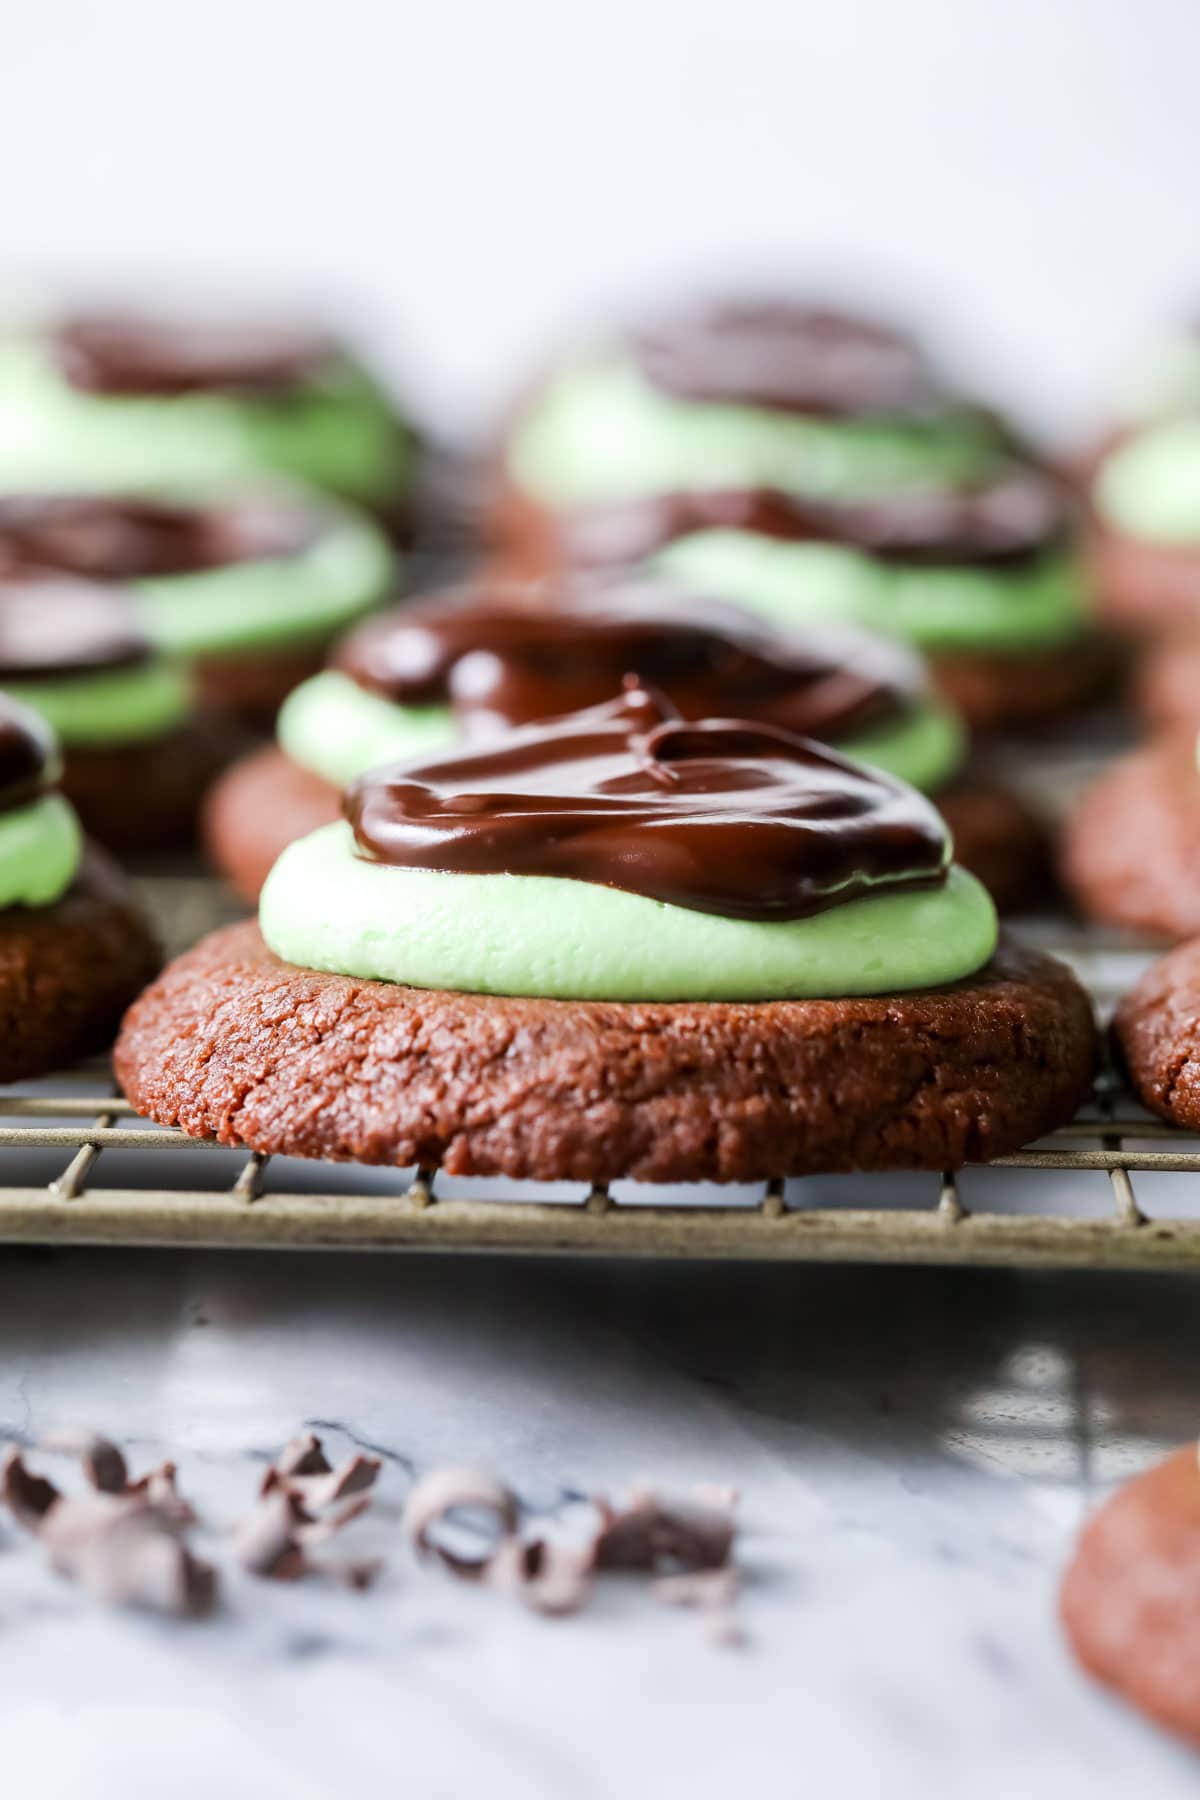 Close up, head-on view of a row of mint chocolate cookies on a cooling rack.